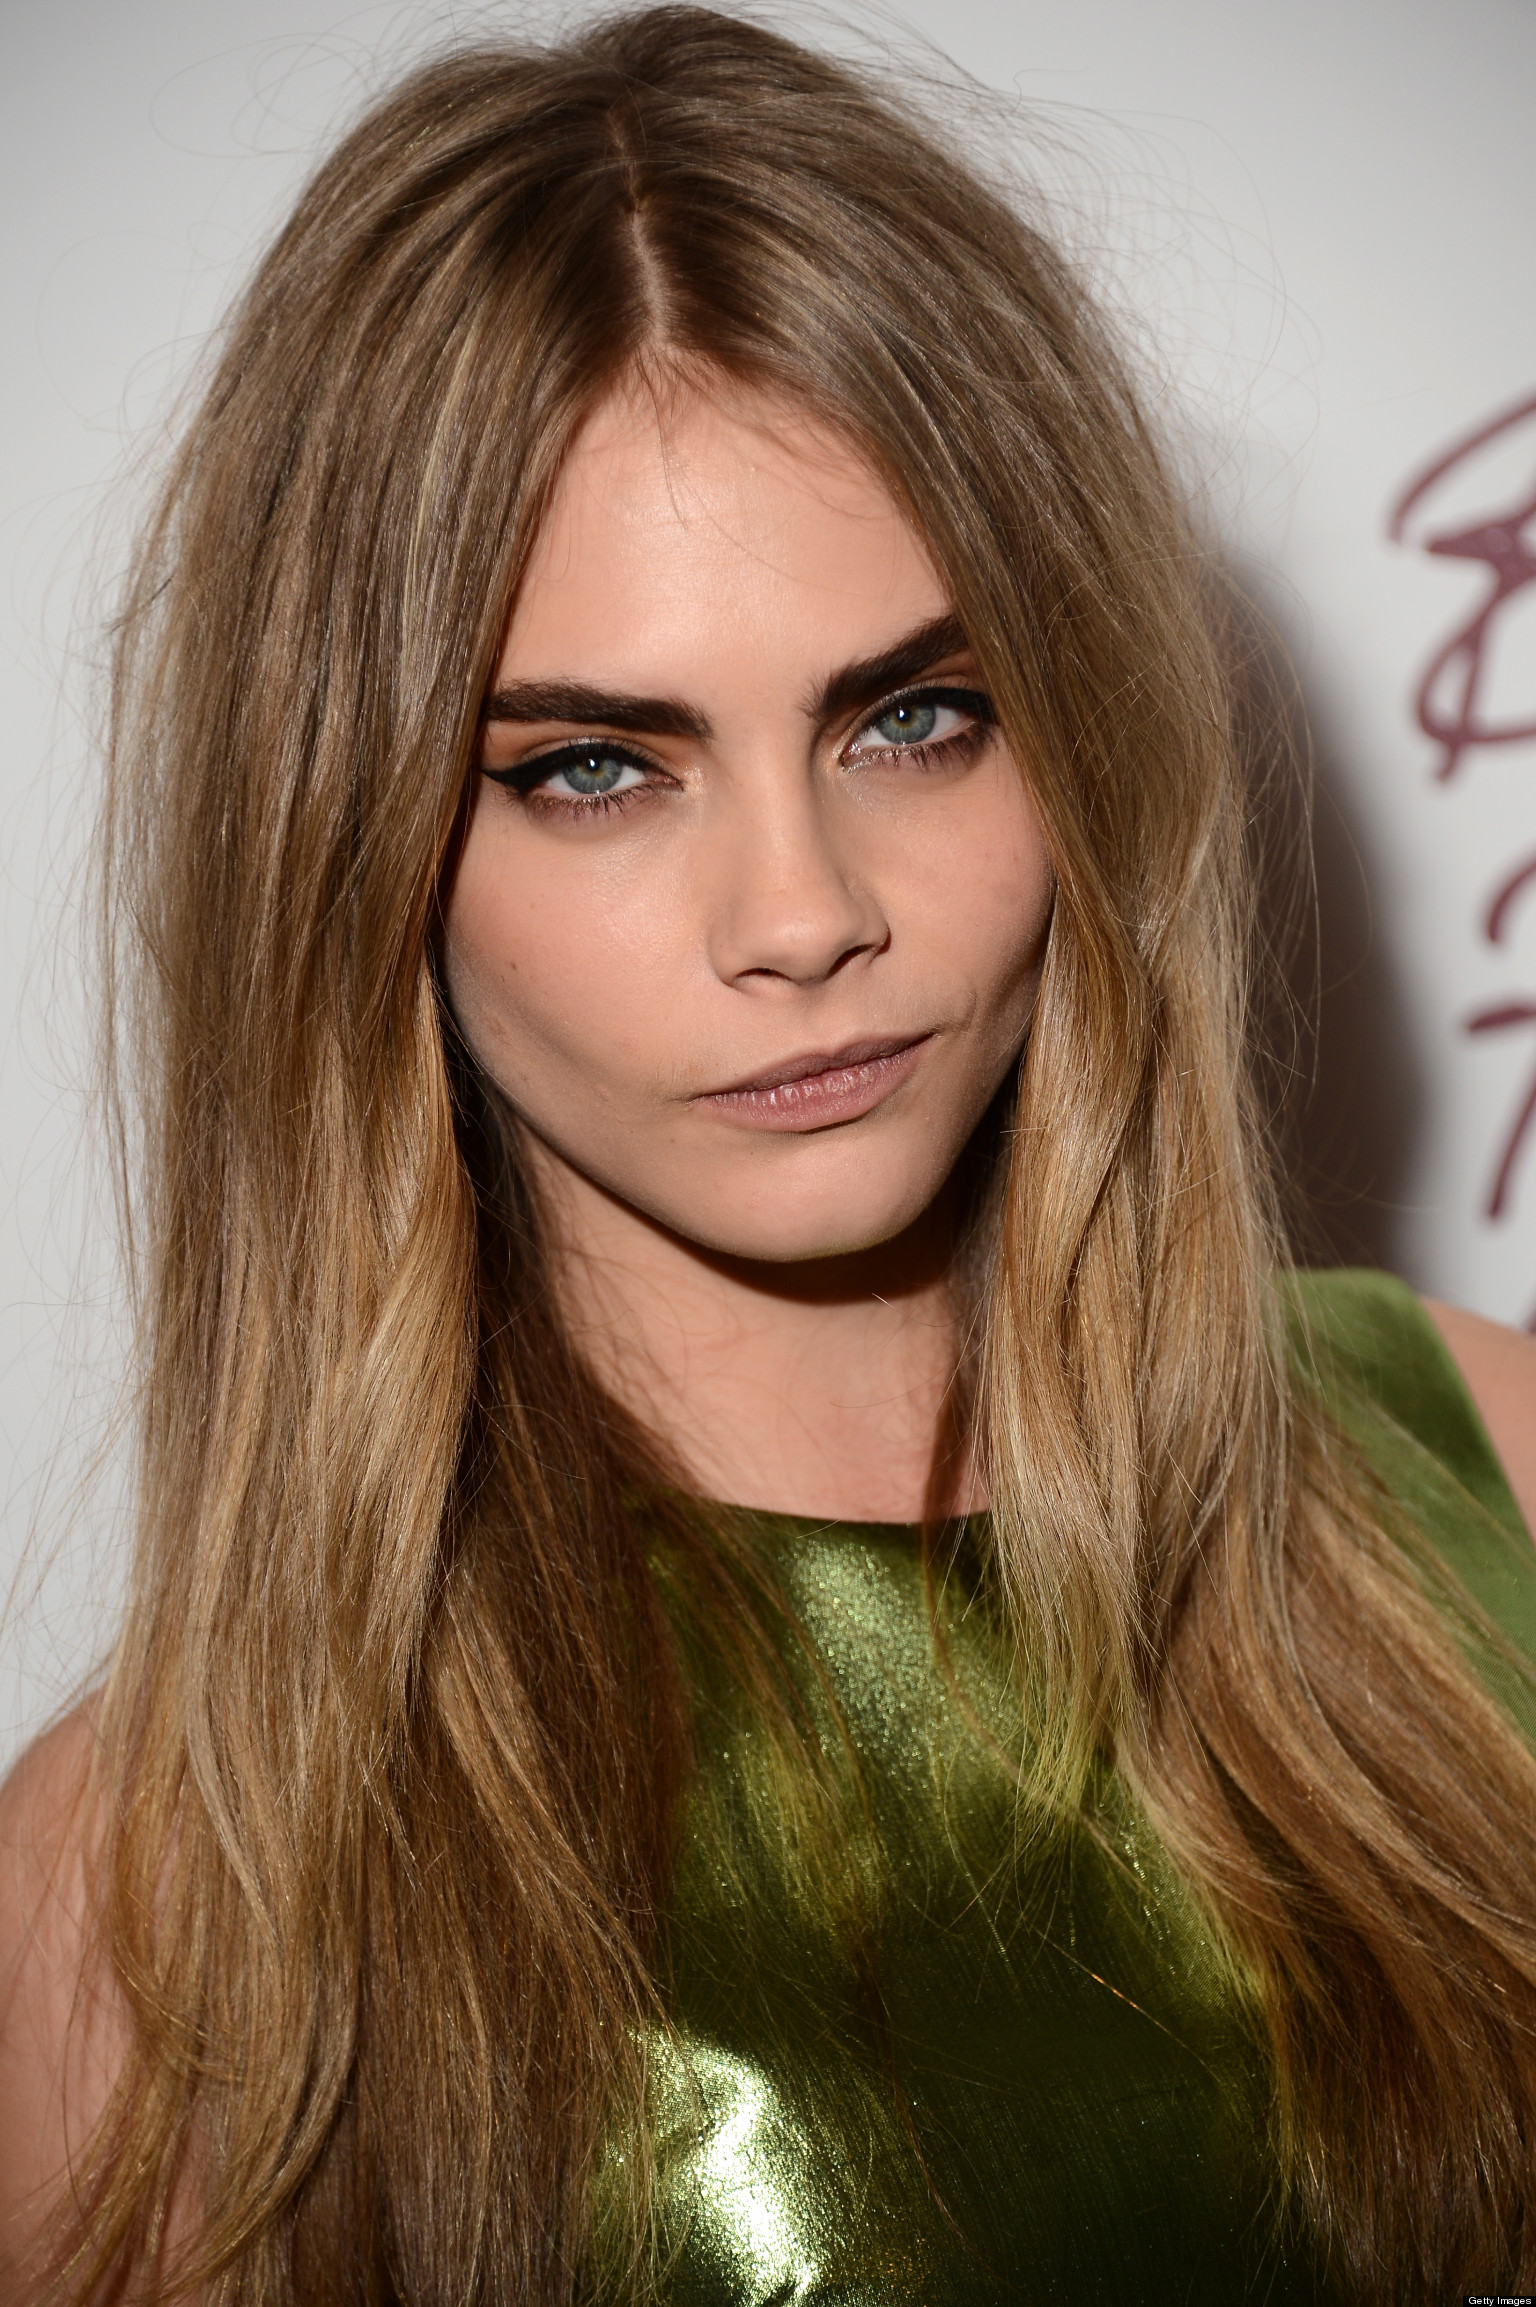 Cara Delevingne: 'Harry Styles' Fans Are F**ked Up' | HuffPost UK